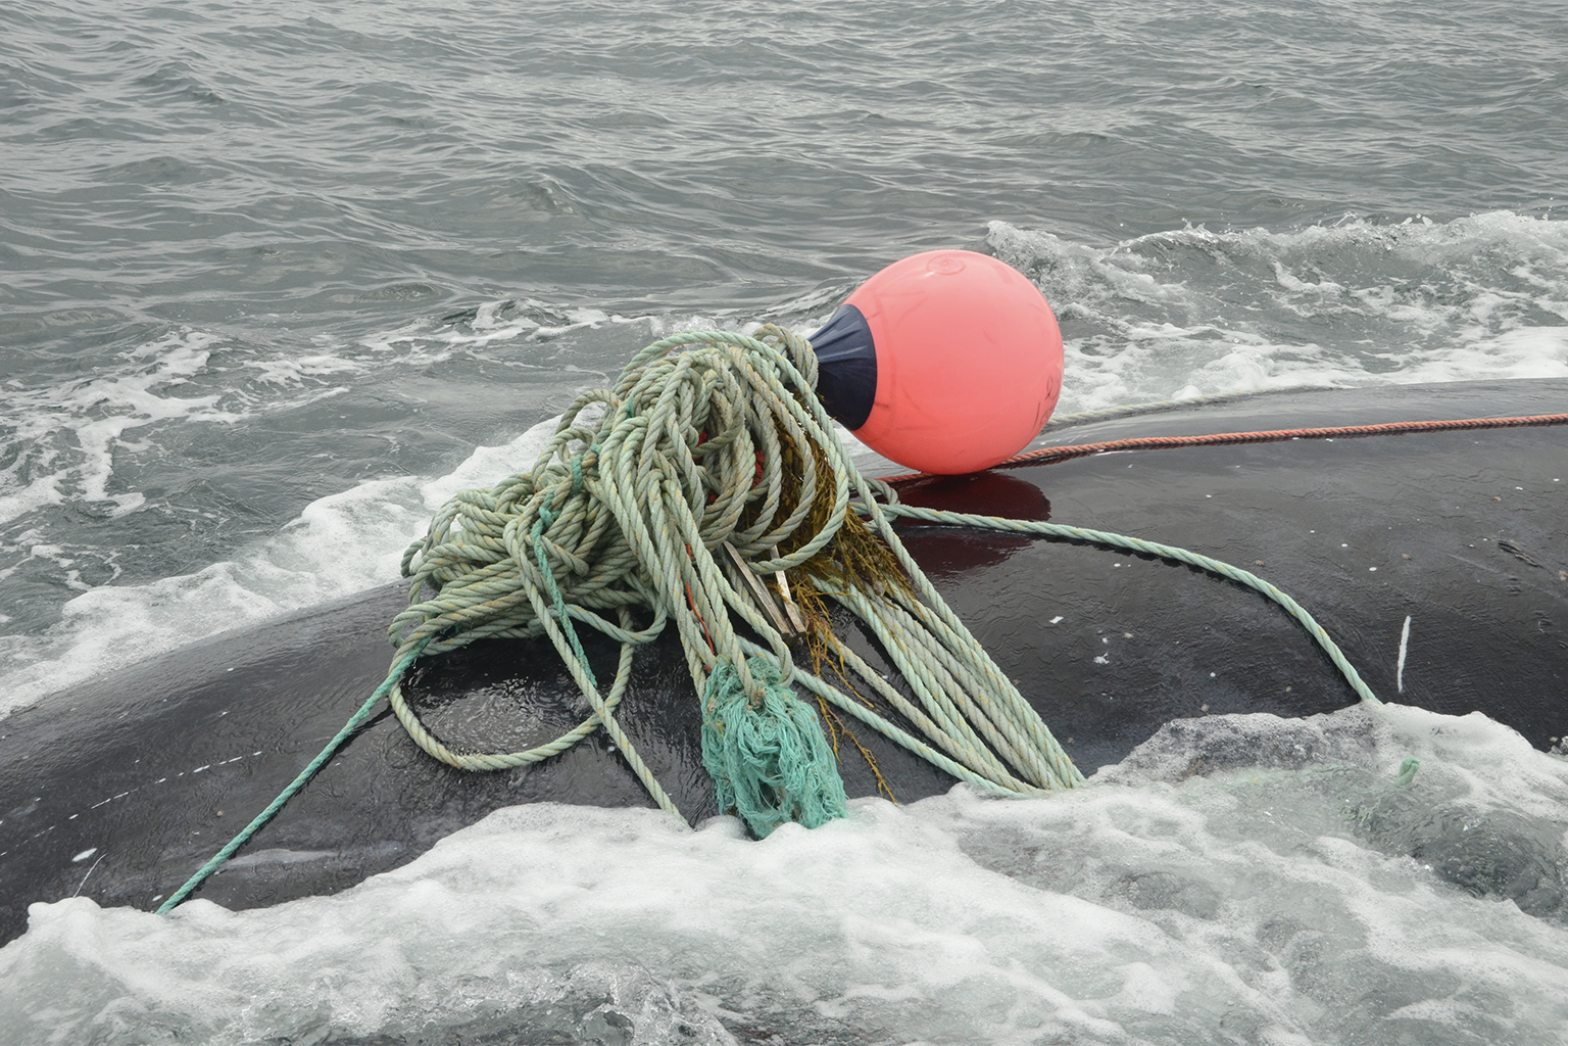 “FDR” (Catalog #4057) in 2016 in the Bay of Fundy. FDR was entangled in a large amount of fishing gear, but was successfully disentangled by the Campobello Whale Rescue Team. Unfortunately, FDR had suffered a previous severe entanglement in 2014 as well. He has not been seen since he was freed of this gear. Image courtesy of Jerry Conway / Campobello Whale Rescue Team (Fisheries and Oceans Canada SARA permit).